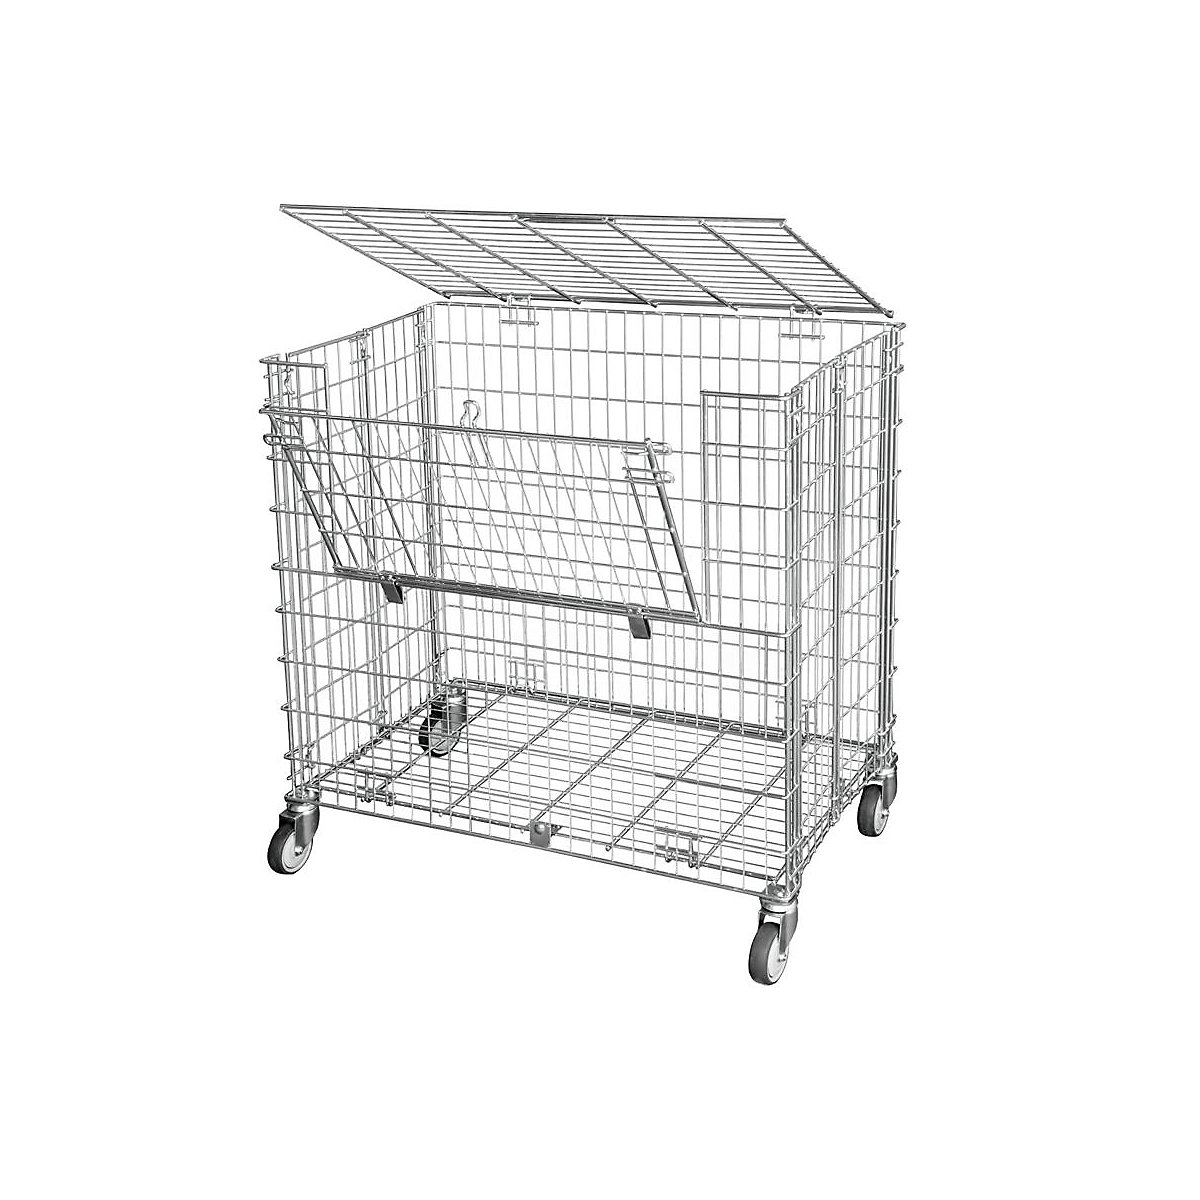 Ball trolley (Product illustration 2)-1